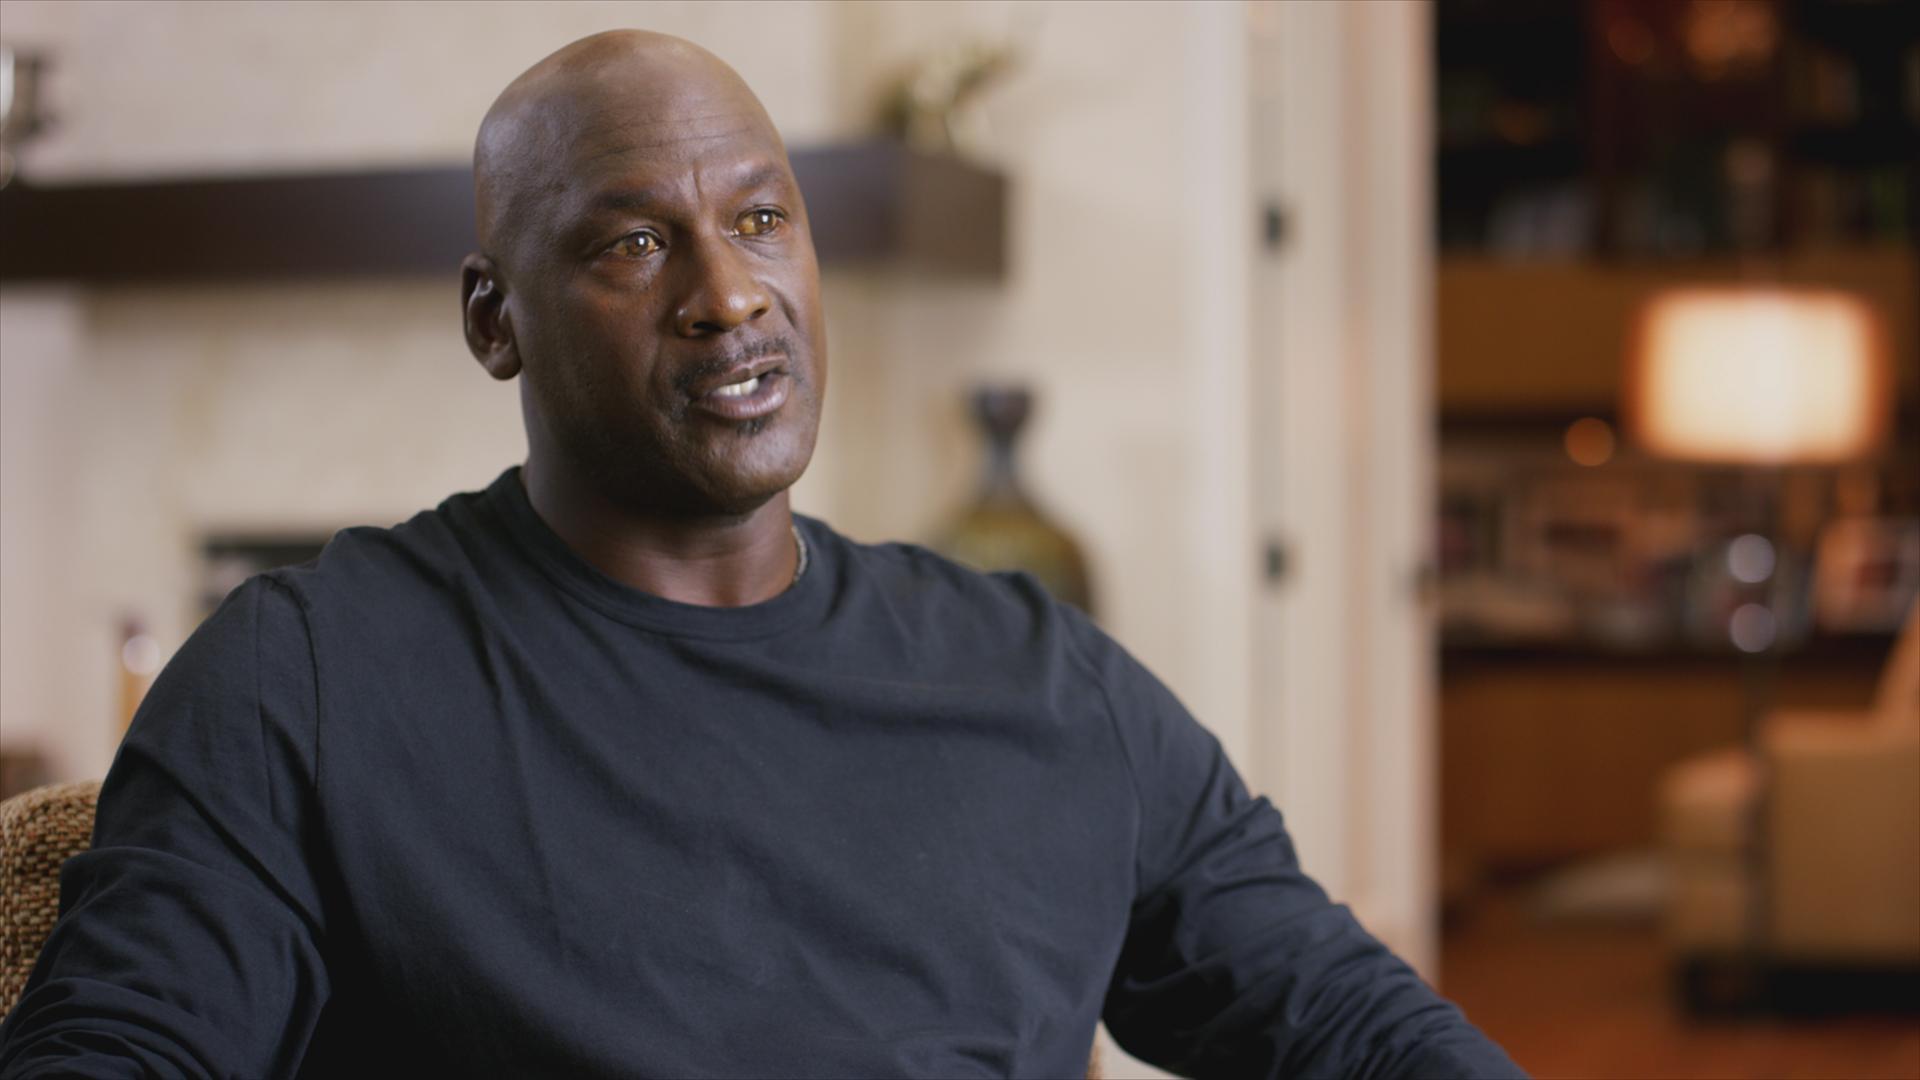 Money talks: Michael Jordan and the impact of not being an athlete activist